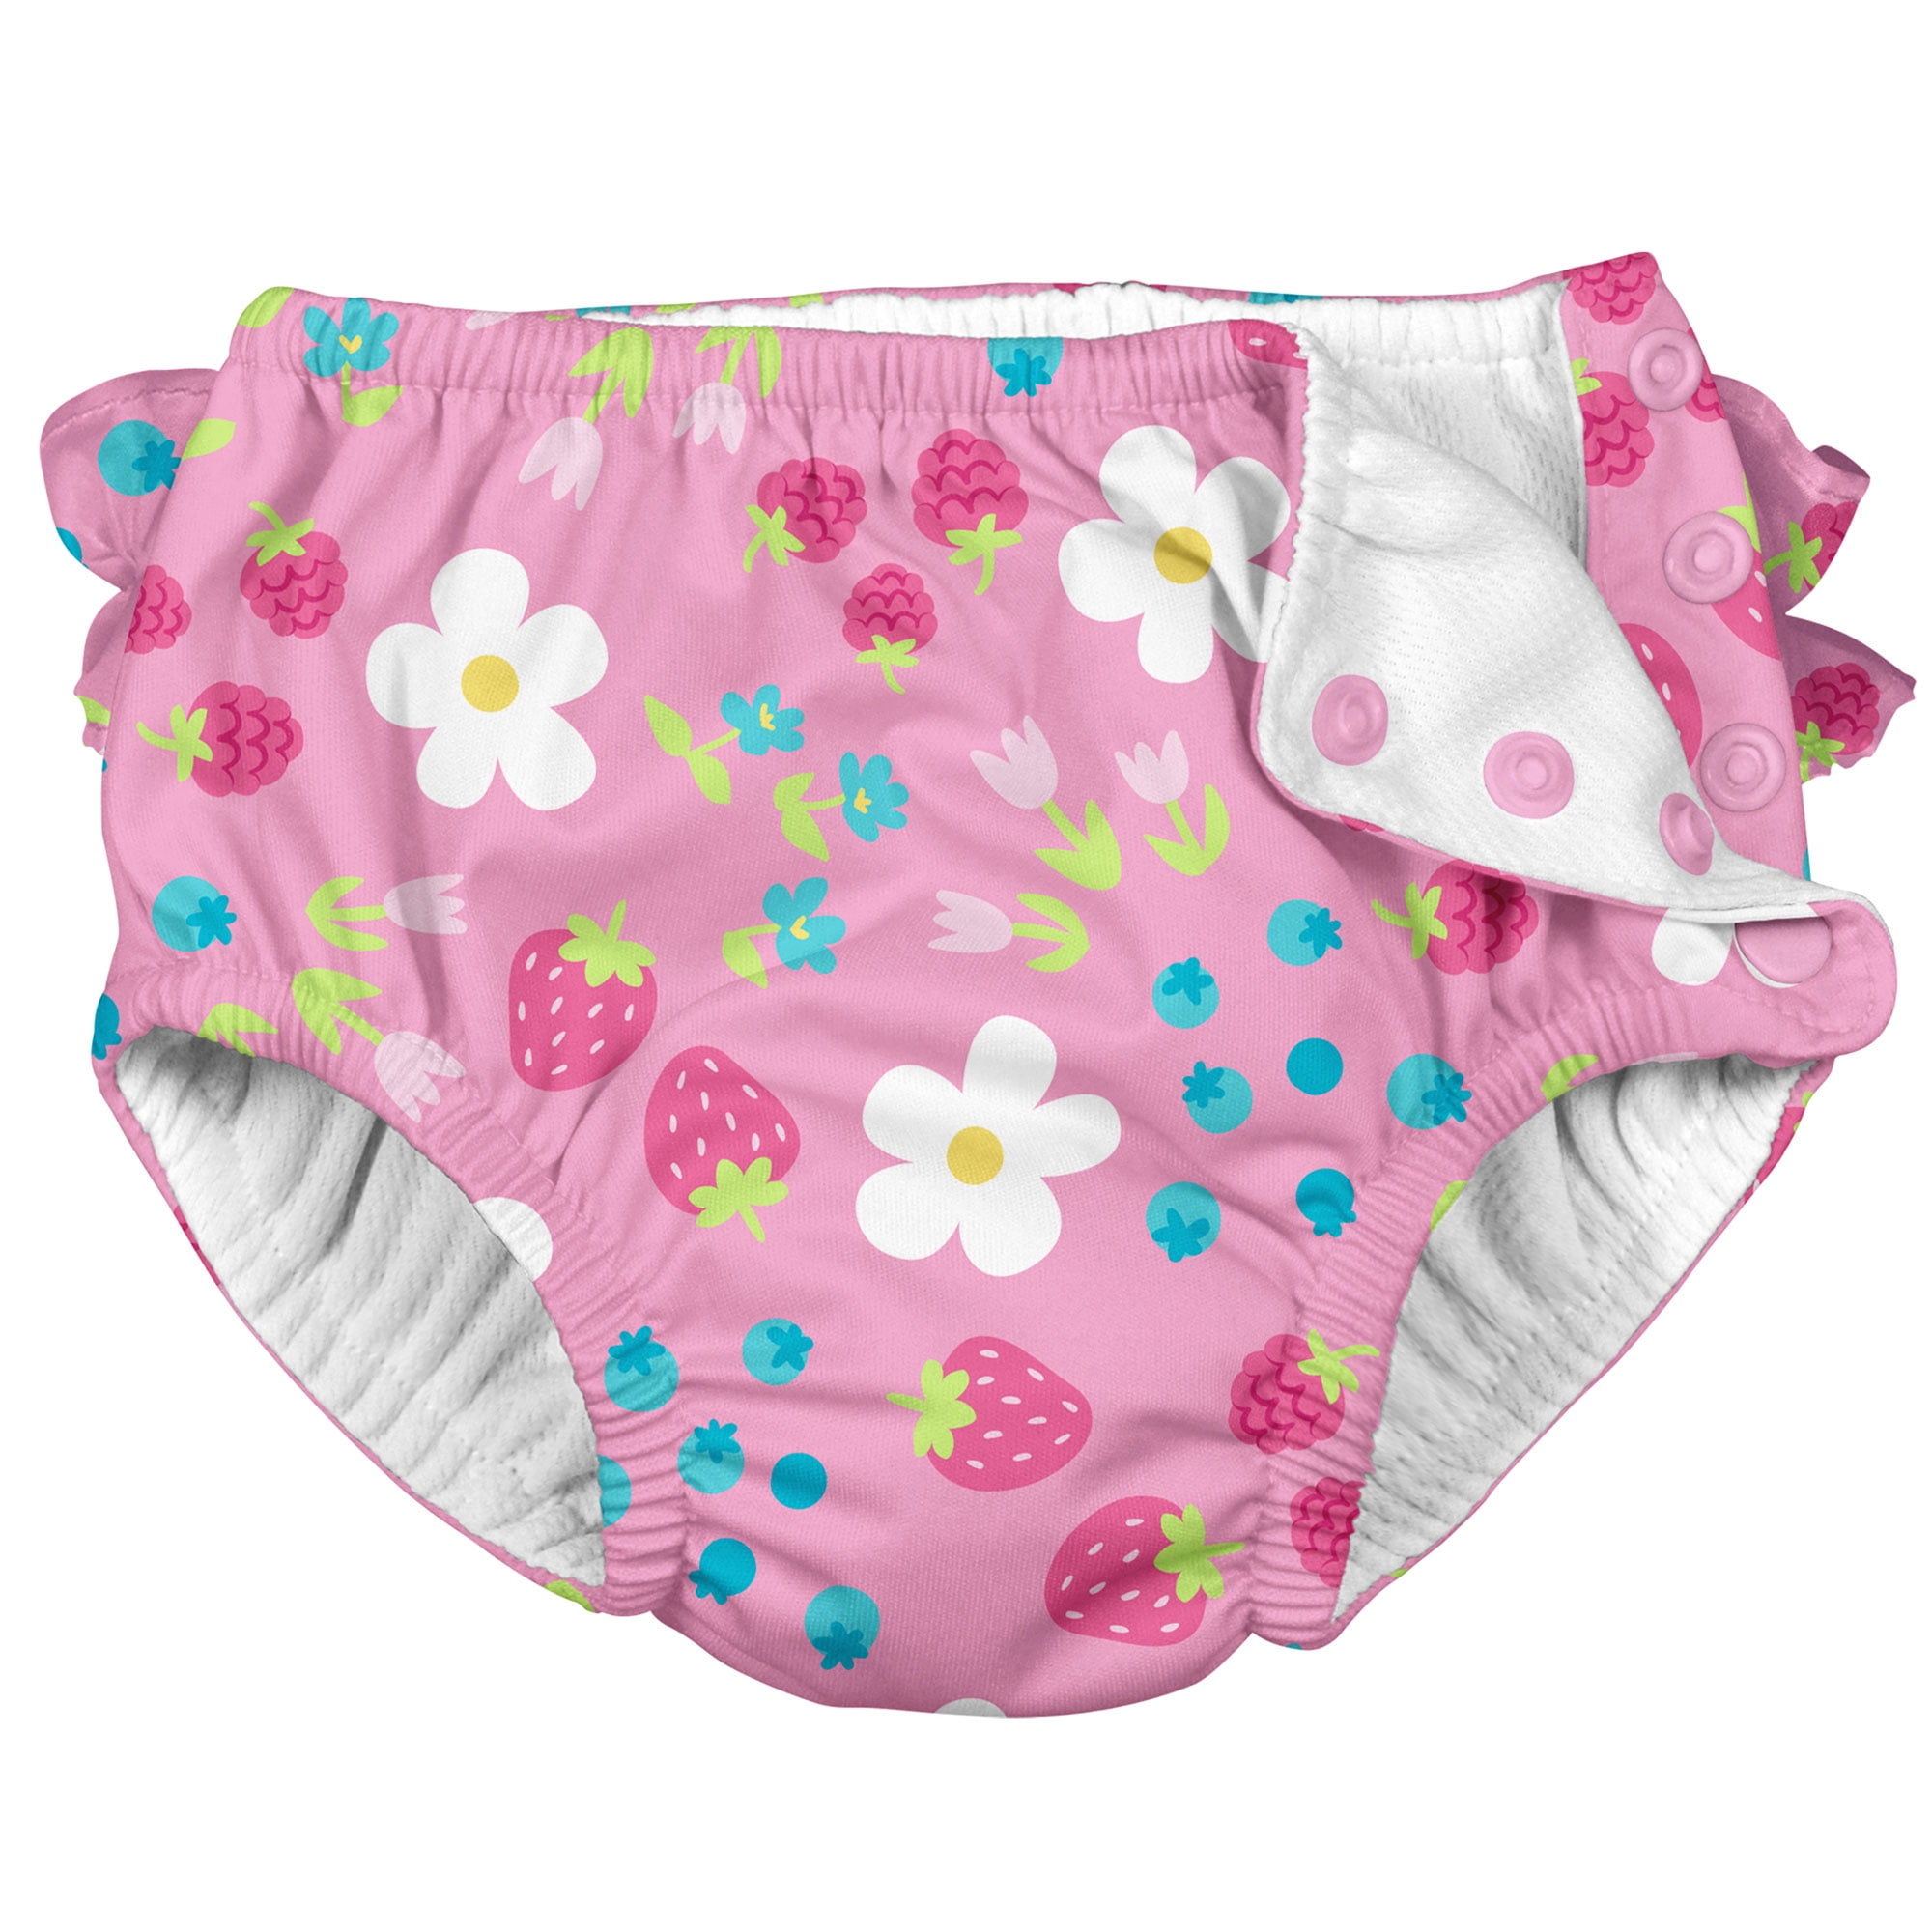 swimming diapers